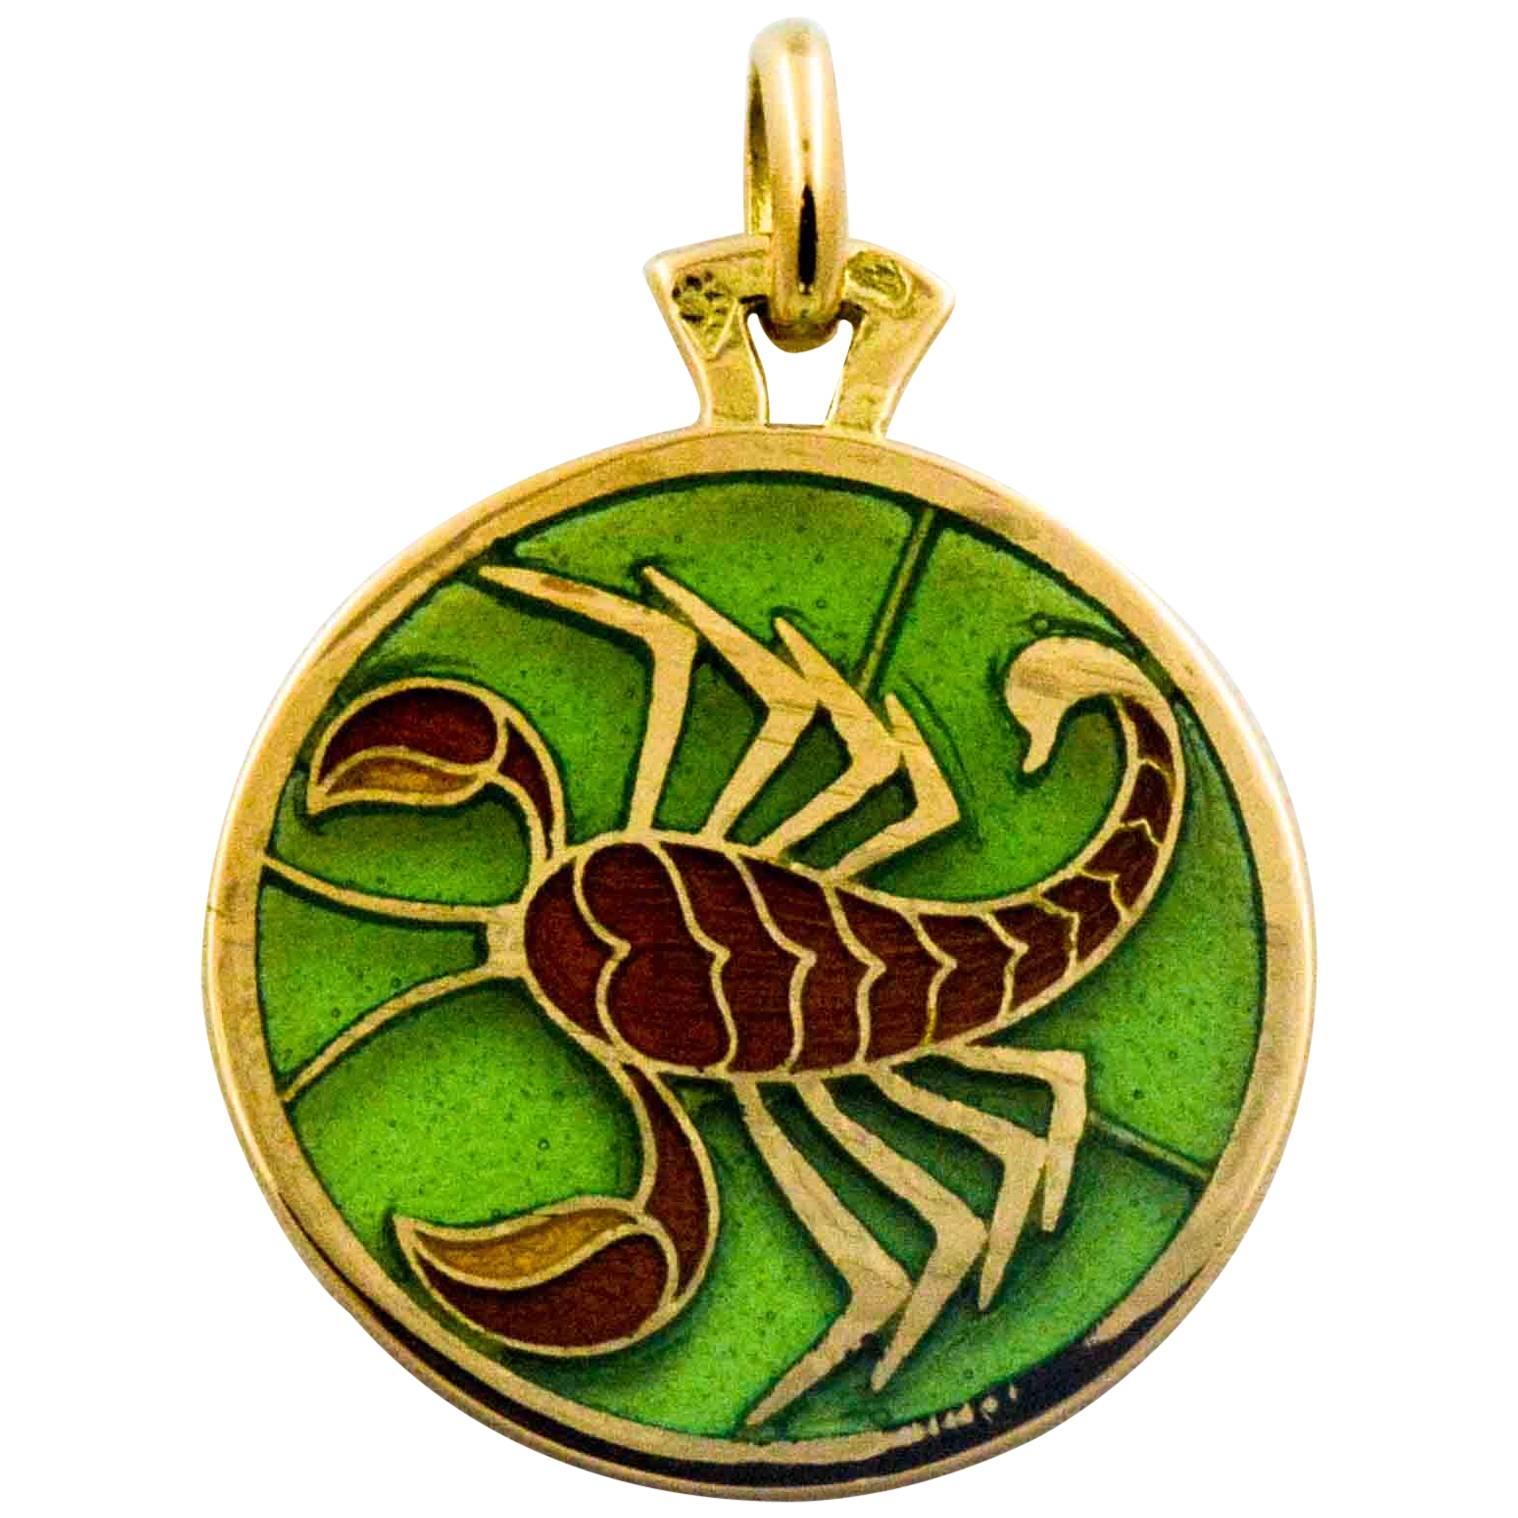 With a pale green stained glass background, this 18 karat yellow gold 19.65mm Scorpio pendant is lightweight  with intricate details handcrafted by a master Plique a Jour craftsman.  The beauty is in the details of this Scorpio hand enameled pendant.